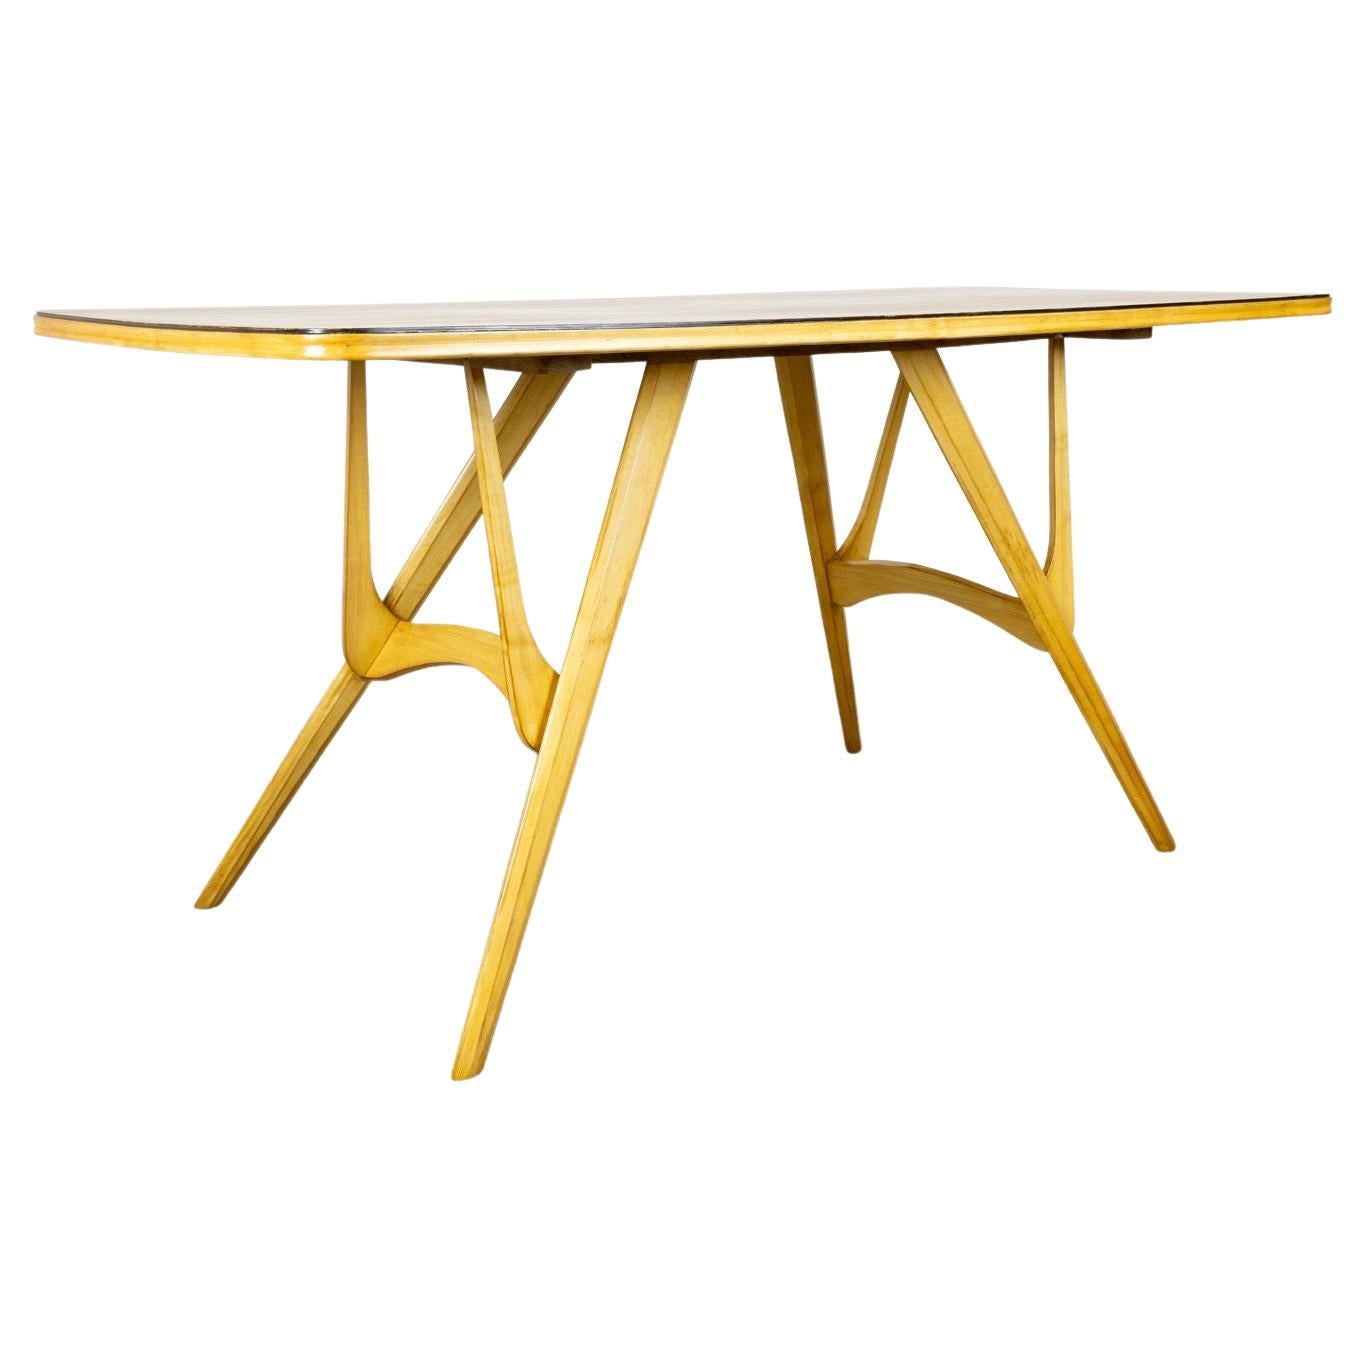 Anthropomorphic wooden table by Franco Campo and Carlo Graffi 1950s For Sale